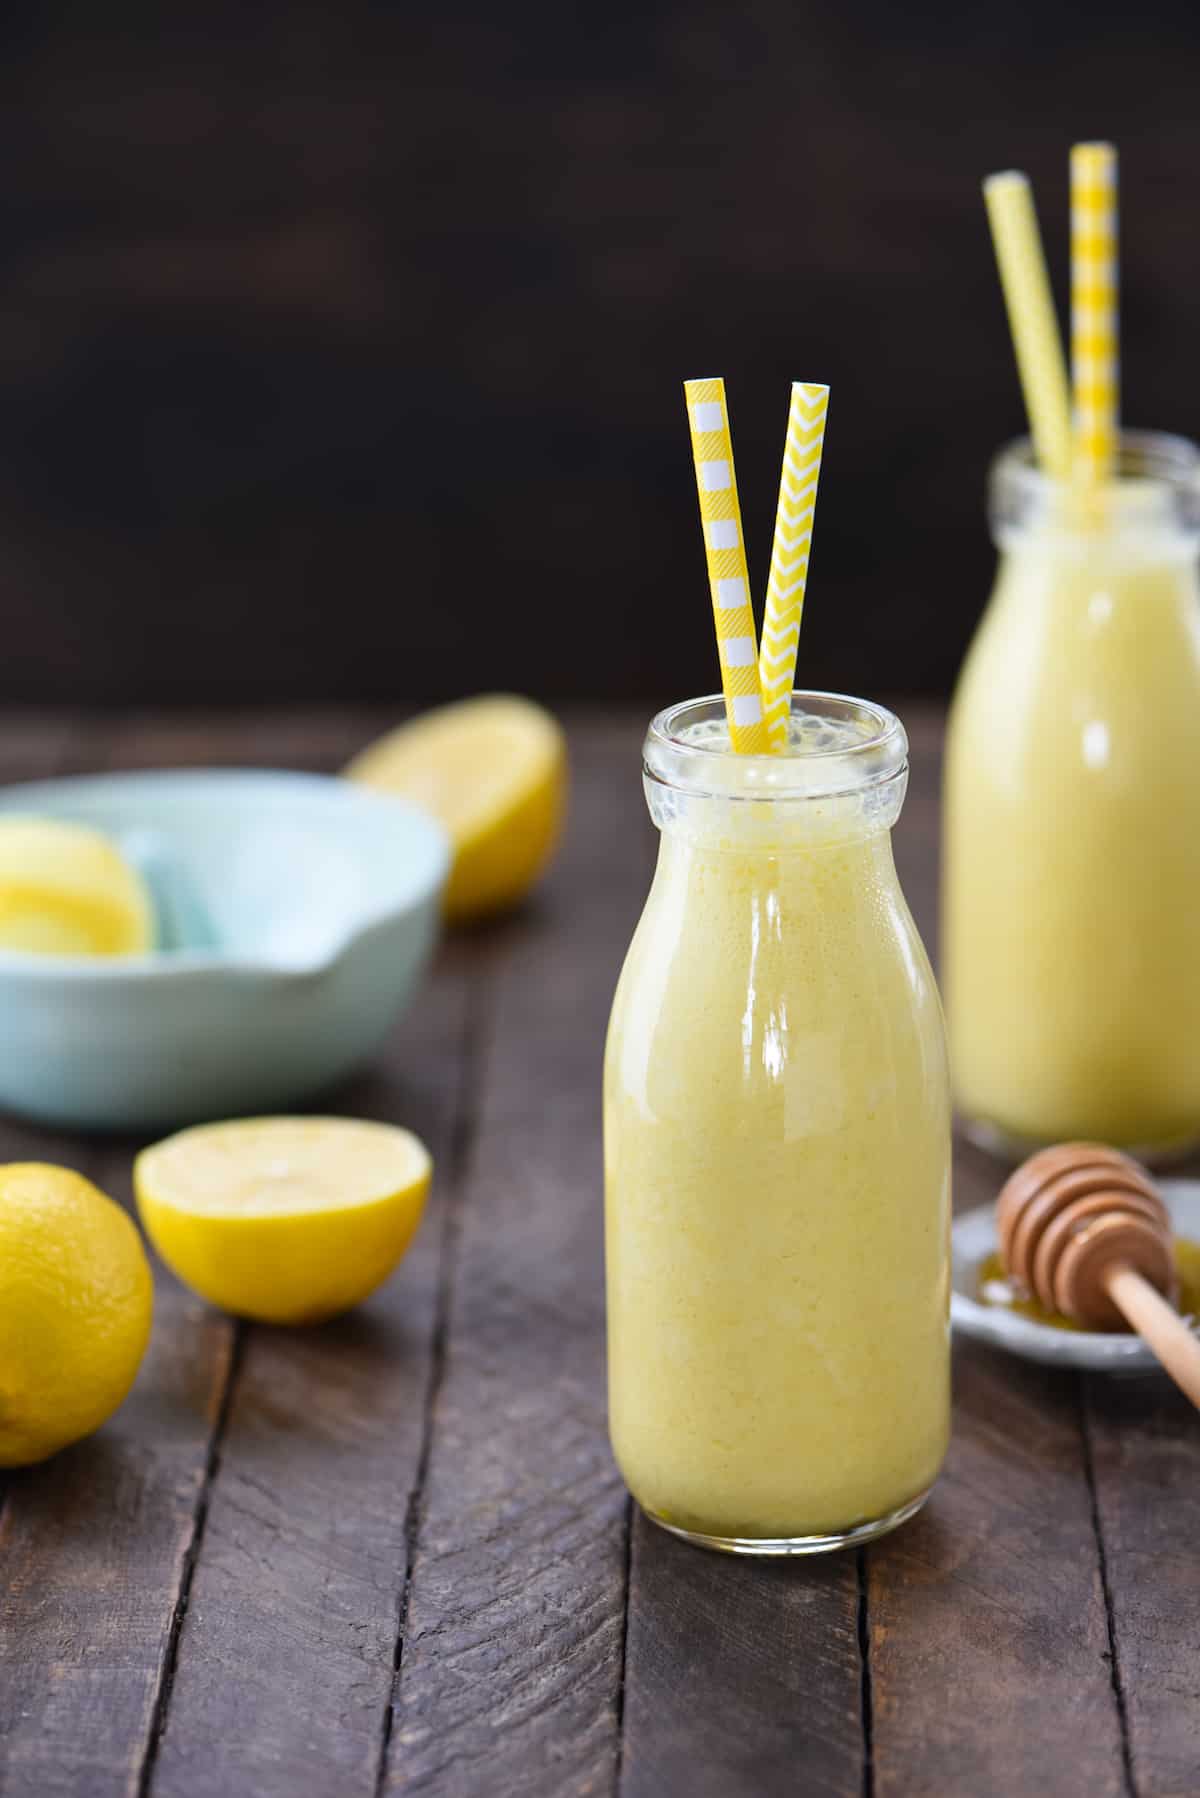 Sunshine in a Bottle Lemon Smoothie - A healthy way to jolt yourself awake on a dreary morning. | foxeslovelemons.com